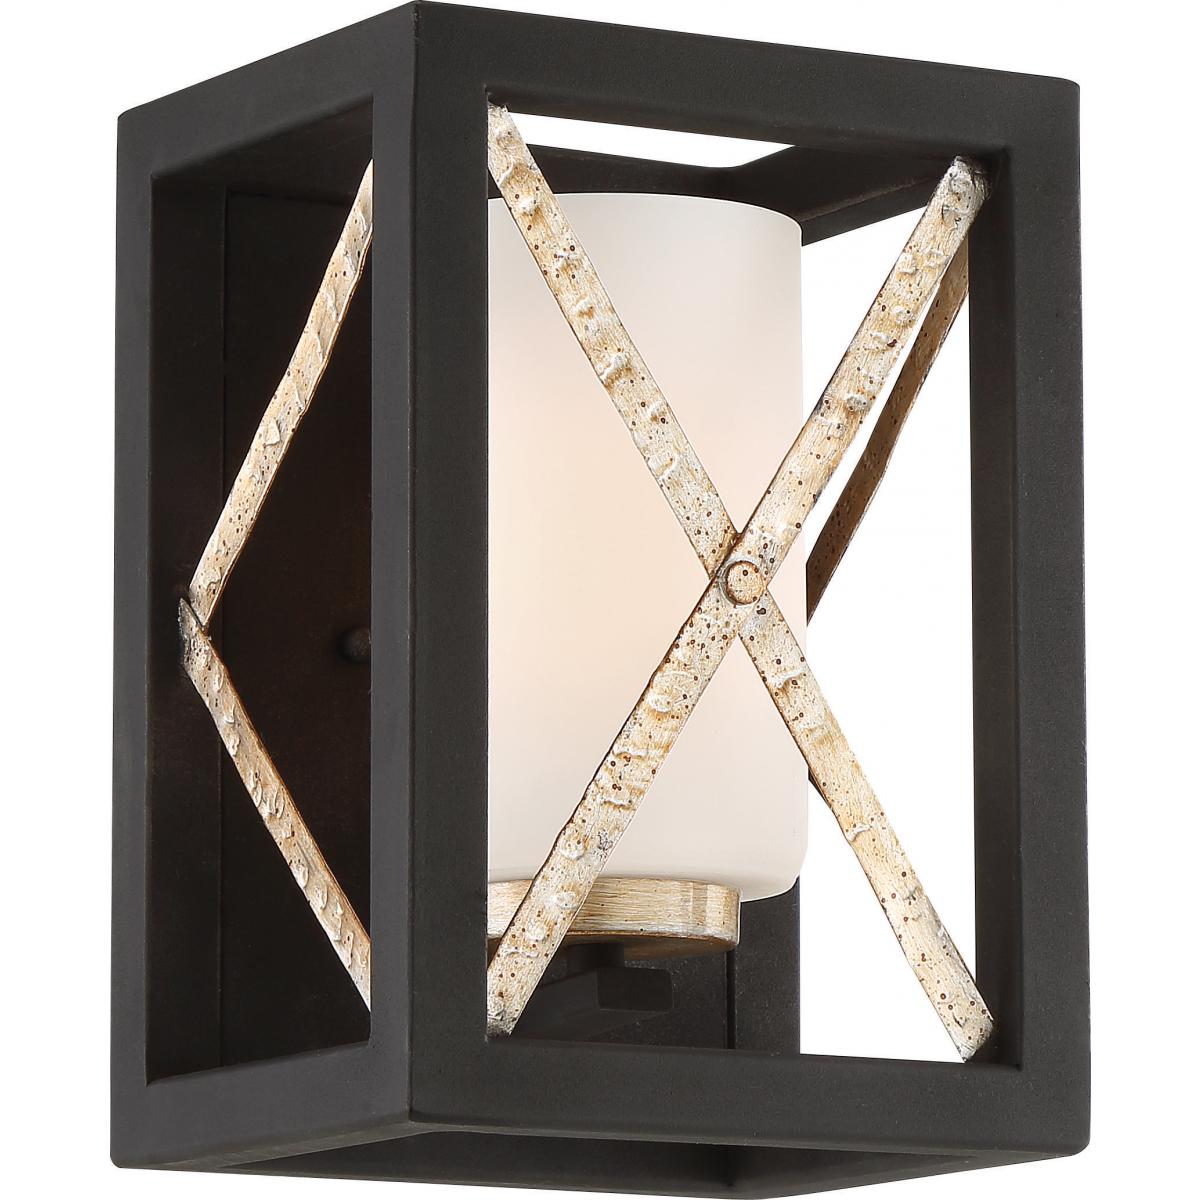 60-6131 BOXER 1 LIGHT WALL SCONCE